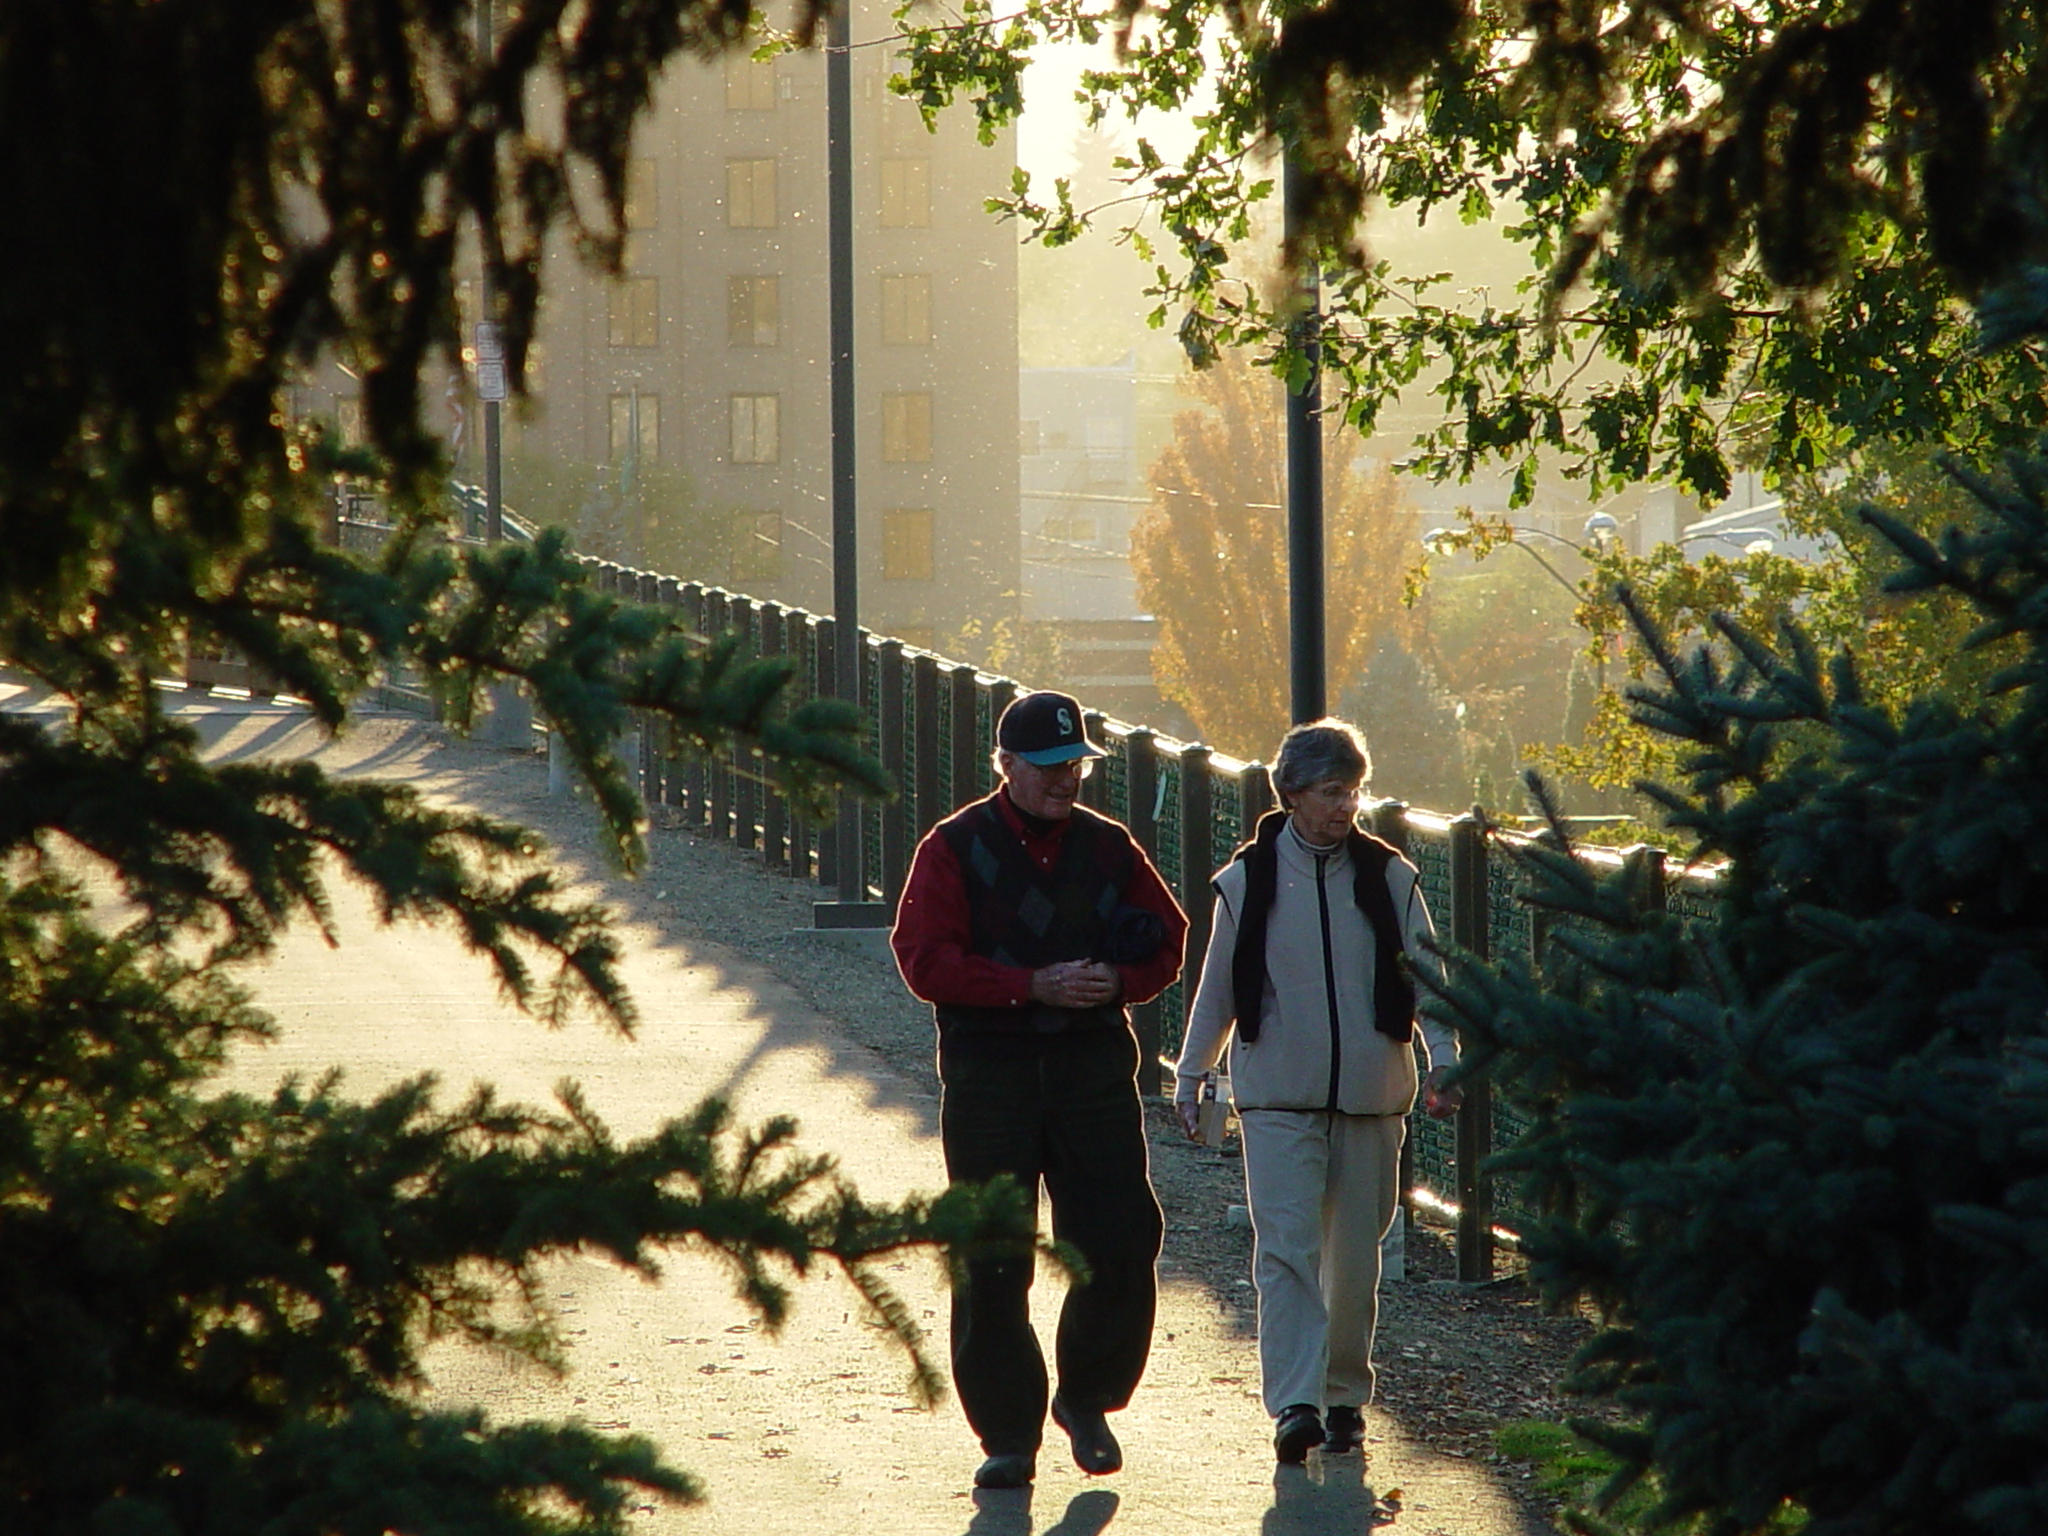 Two people walking in a park